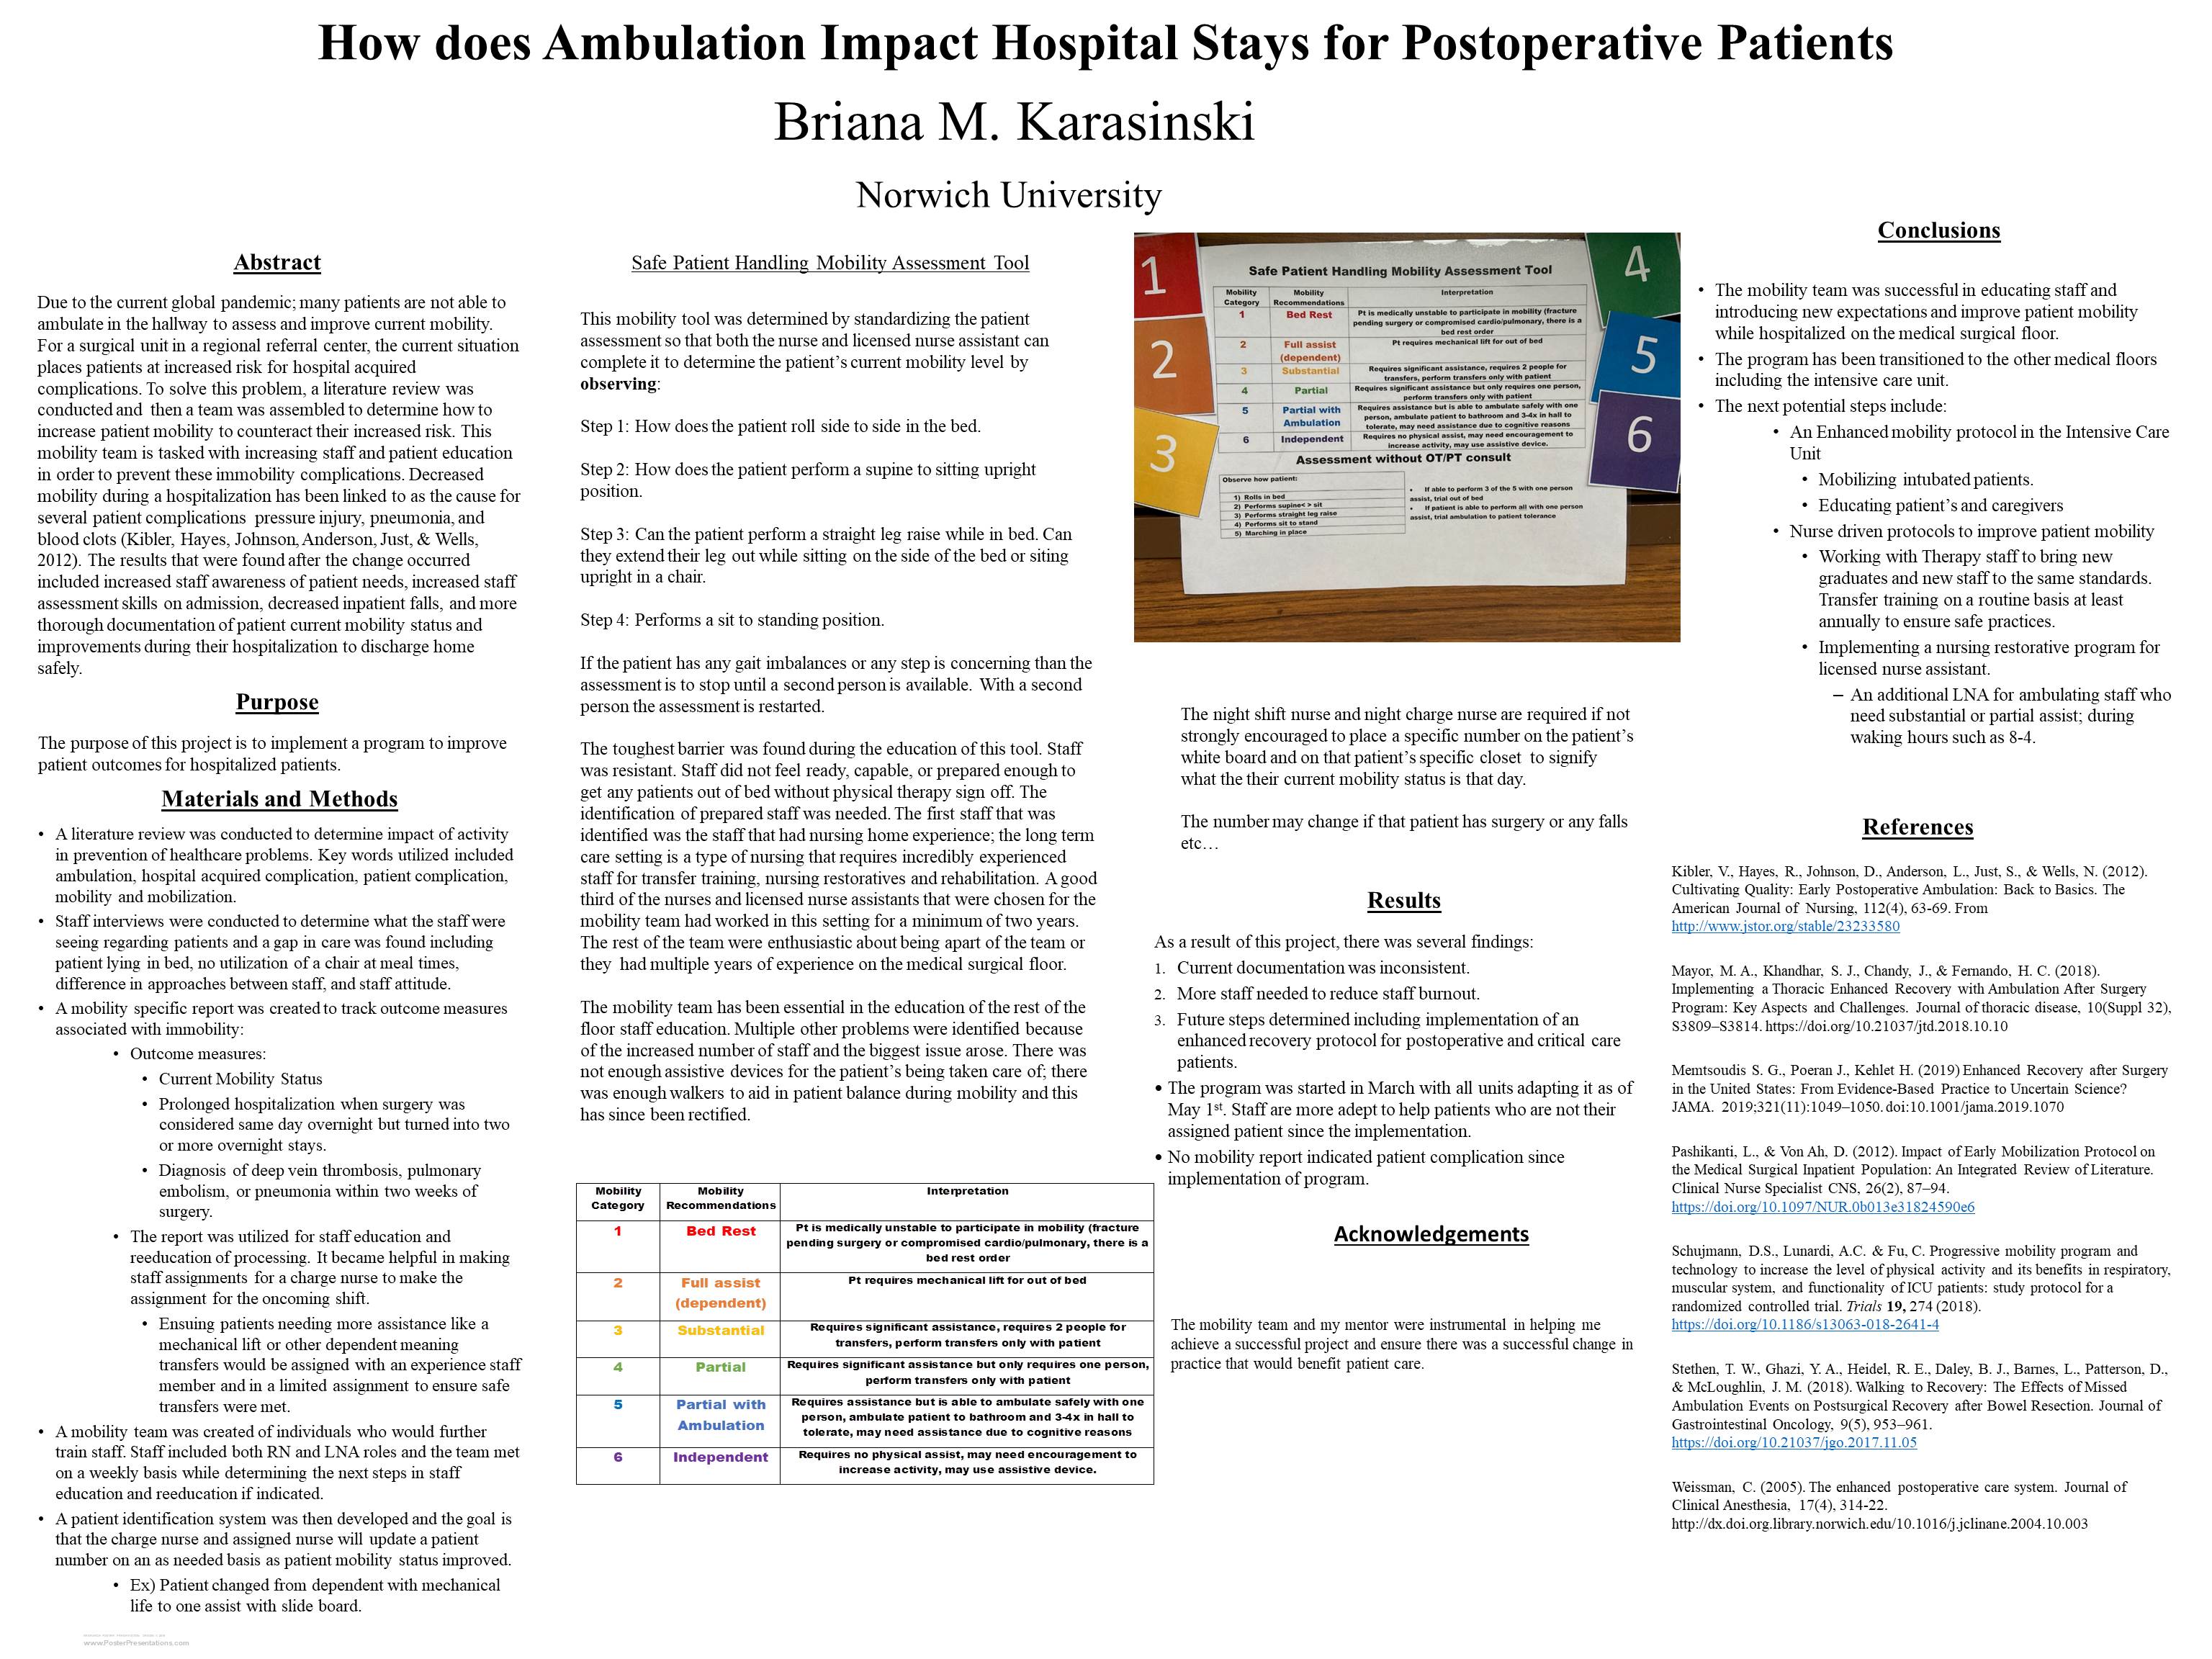 Showcase Image for How does Ambulation Impact Hospital Stays for Postoperative Patients